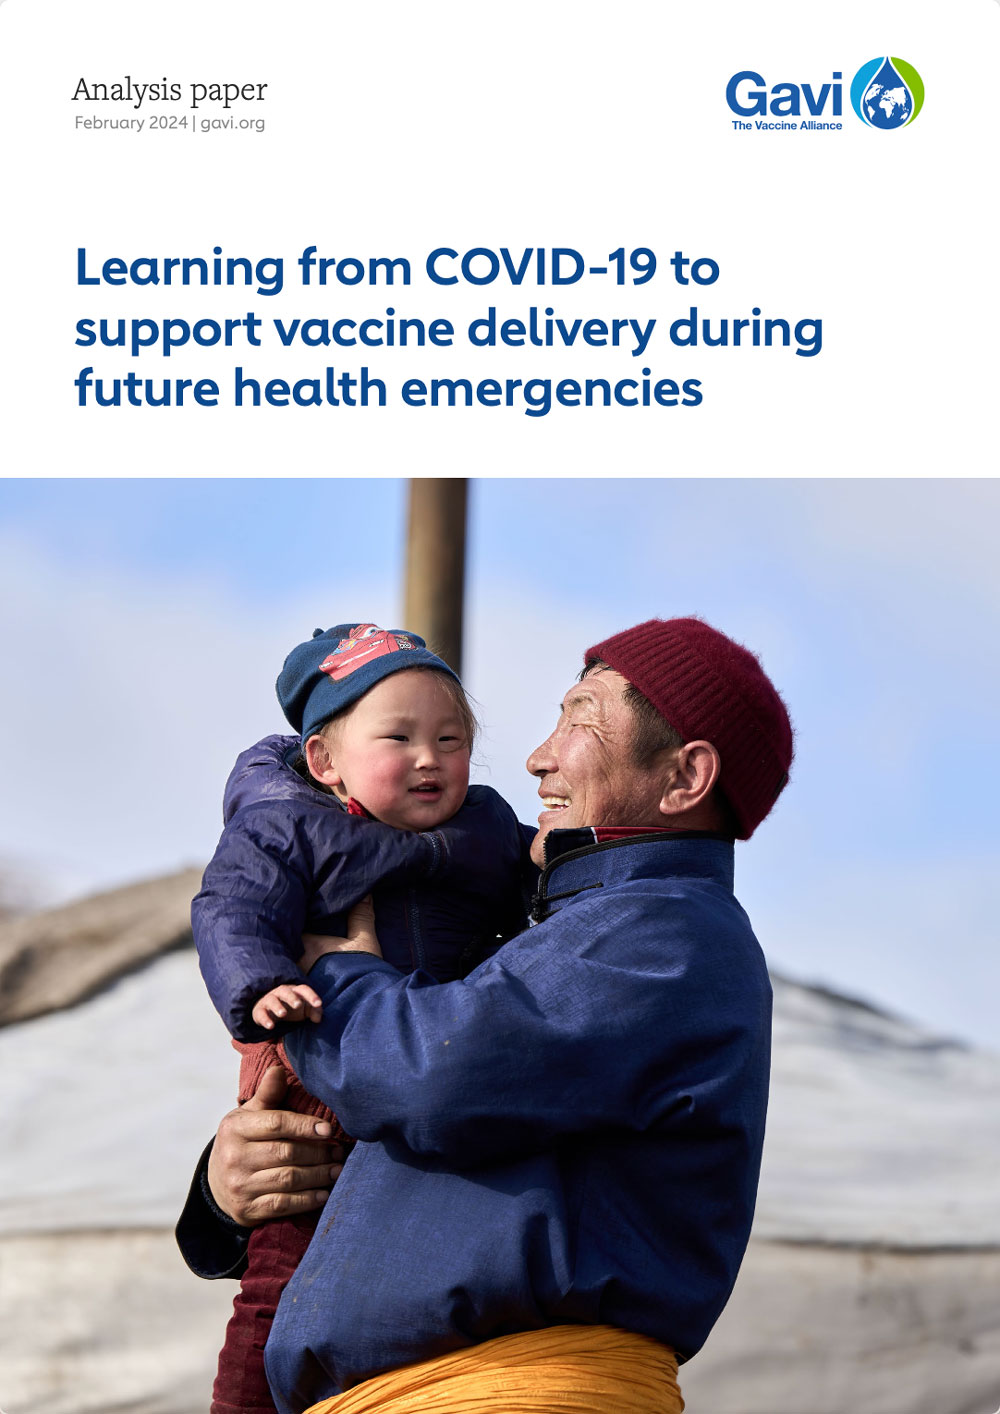 Learning from COVID-19 to support vaccine delivery during future health emergencies